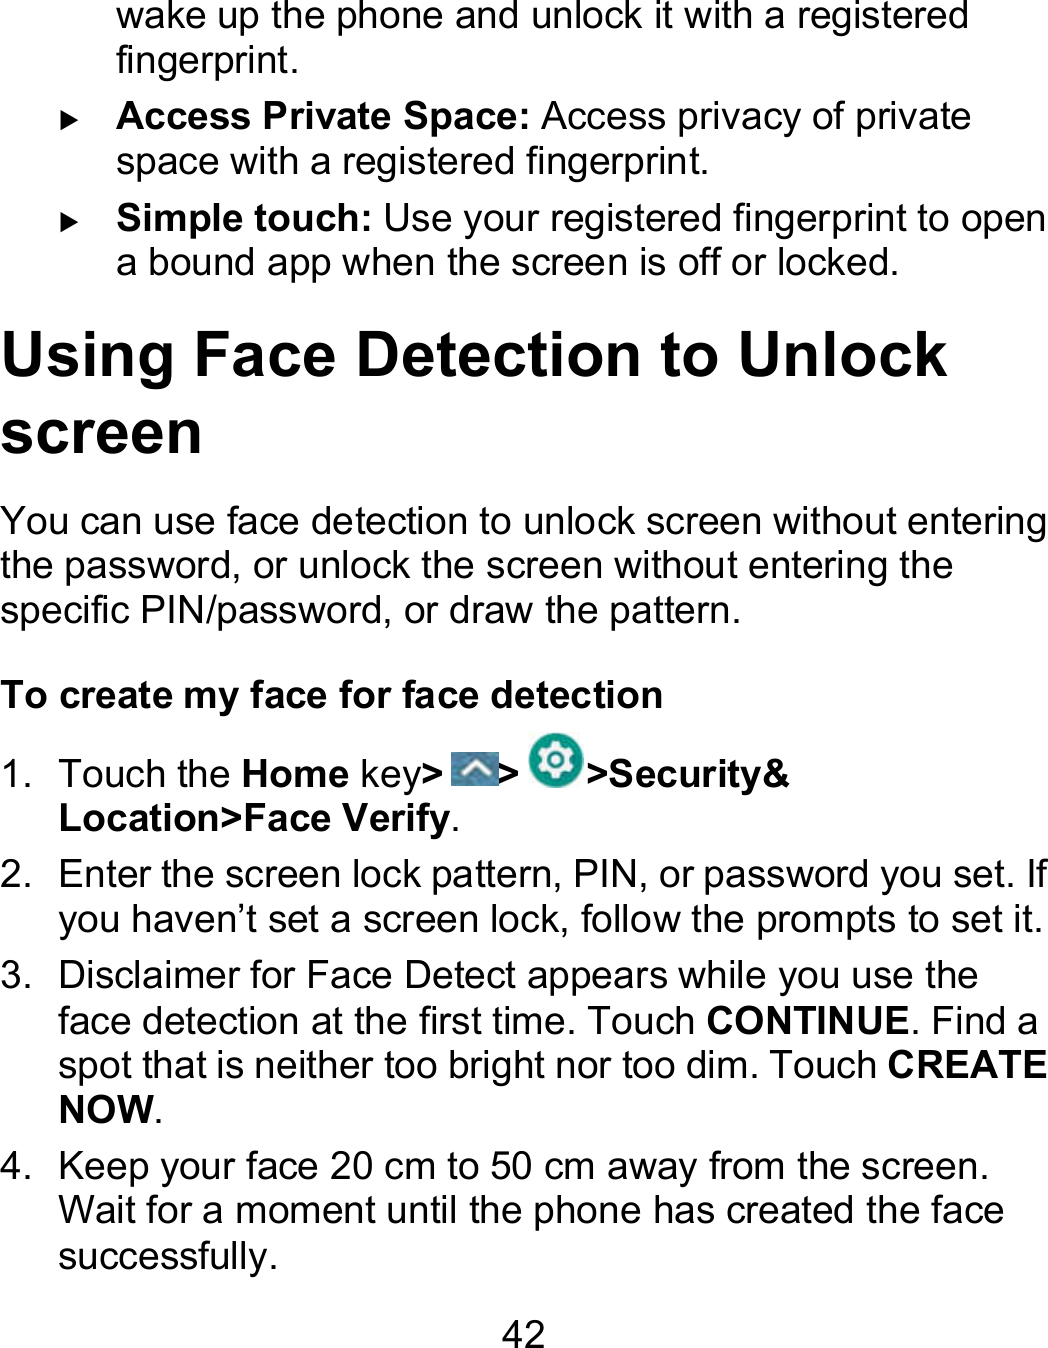 42 wake up the phone and unlock it with a registered fingerprint.  Access Private Space: Access privacy of private space with a registered fingerprint.  Simple touch: Use your registered fingerprint to open a bound app when the screen is off or locked. Using Face Detection to Unlock screen You can use face detection to unlock screen without entering the password, or unlock the screen without entering the specific PIN/password, or draw the pattern. To create my face for face detection 1.  Touch the Home key&gt; &gt; &gt;Security&amp; Location&gt;Face Verify. 2.  Enter the screen lock pattern, PIN, or password you set. If you haven’t set a screen lock, follow the prompts to set it. 3.  Disclaimer for Face Detect appears while you use the face detection at the first time. Touch CONTINUE. Find a spot that is neither too bright nor too dim. Touch CREATE NOW. 4.  Keep your face 20 cm to 50 cm away from the screen. Wait for a moment until the phone has created the face successfully.   